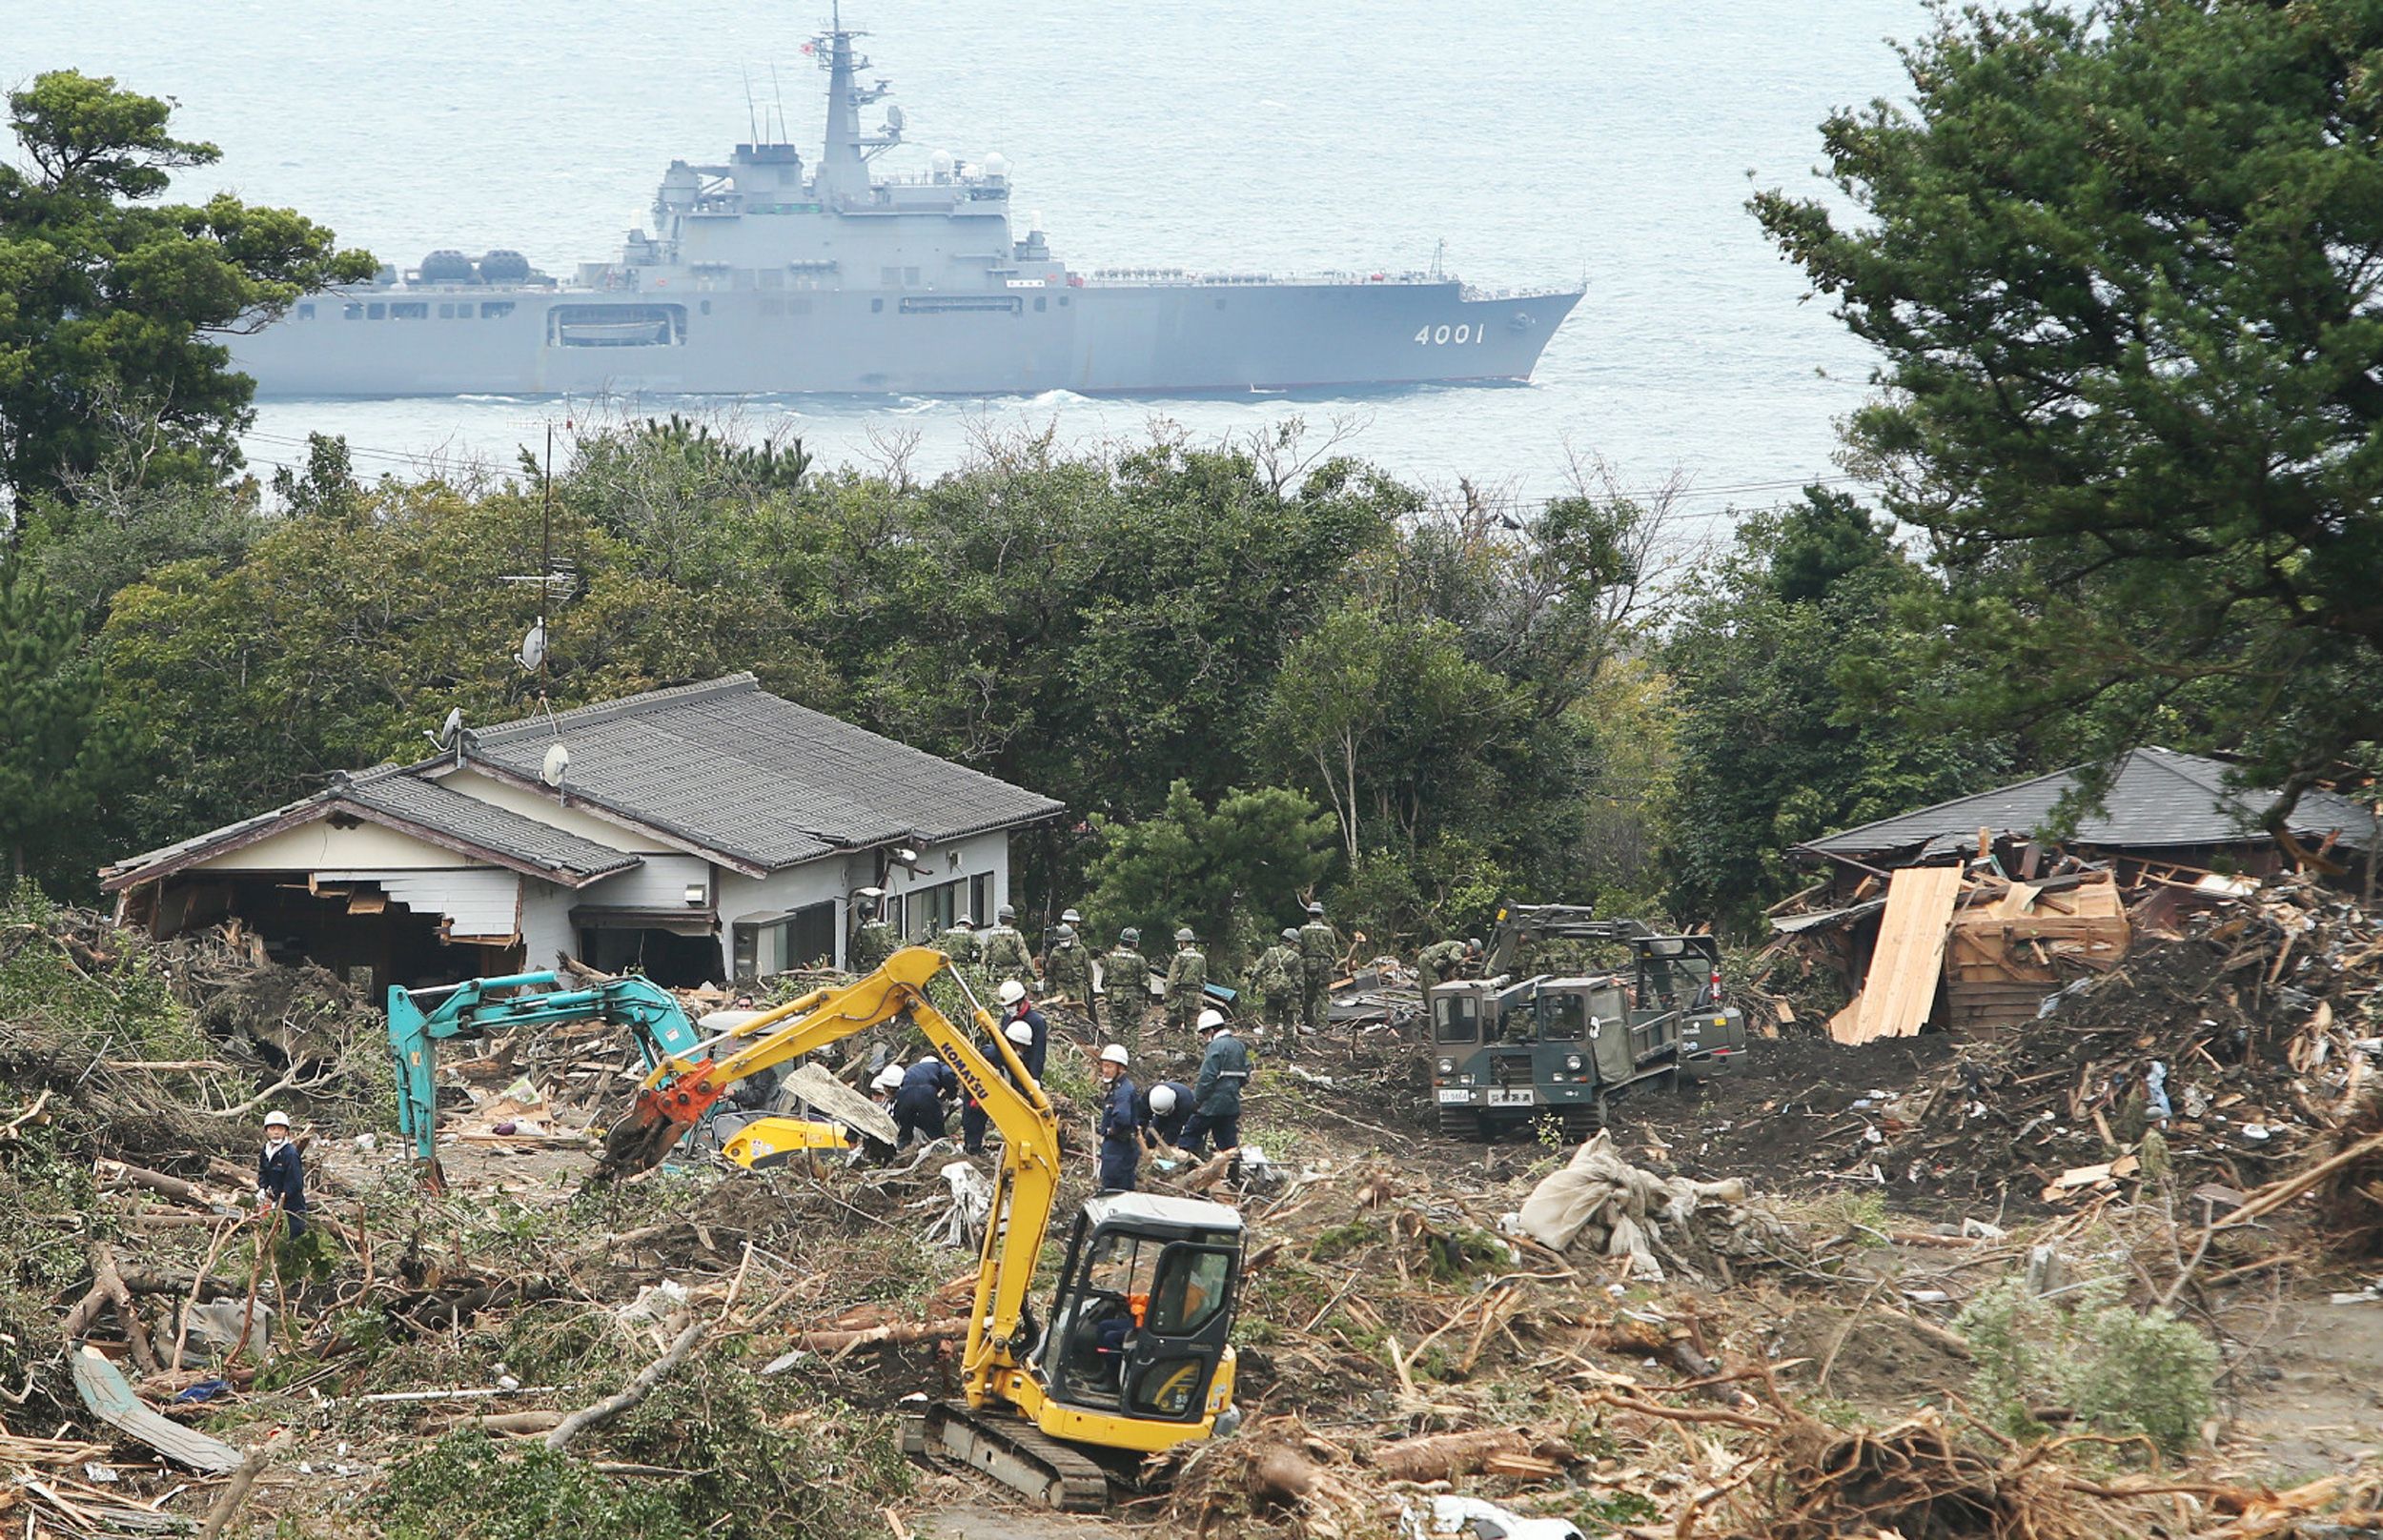 Soldiers remove debris from a damaged houses after a landslide at Oshima island. Photo: AFP